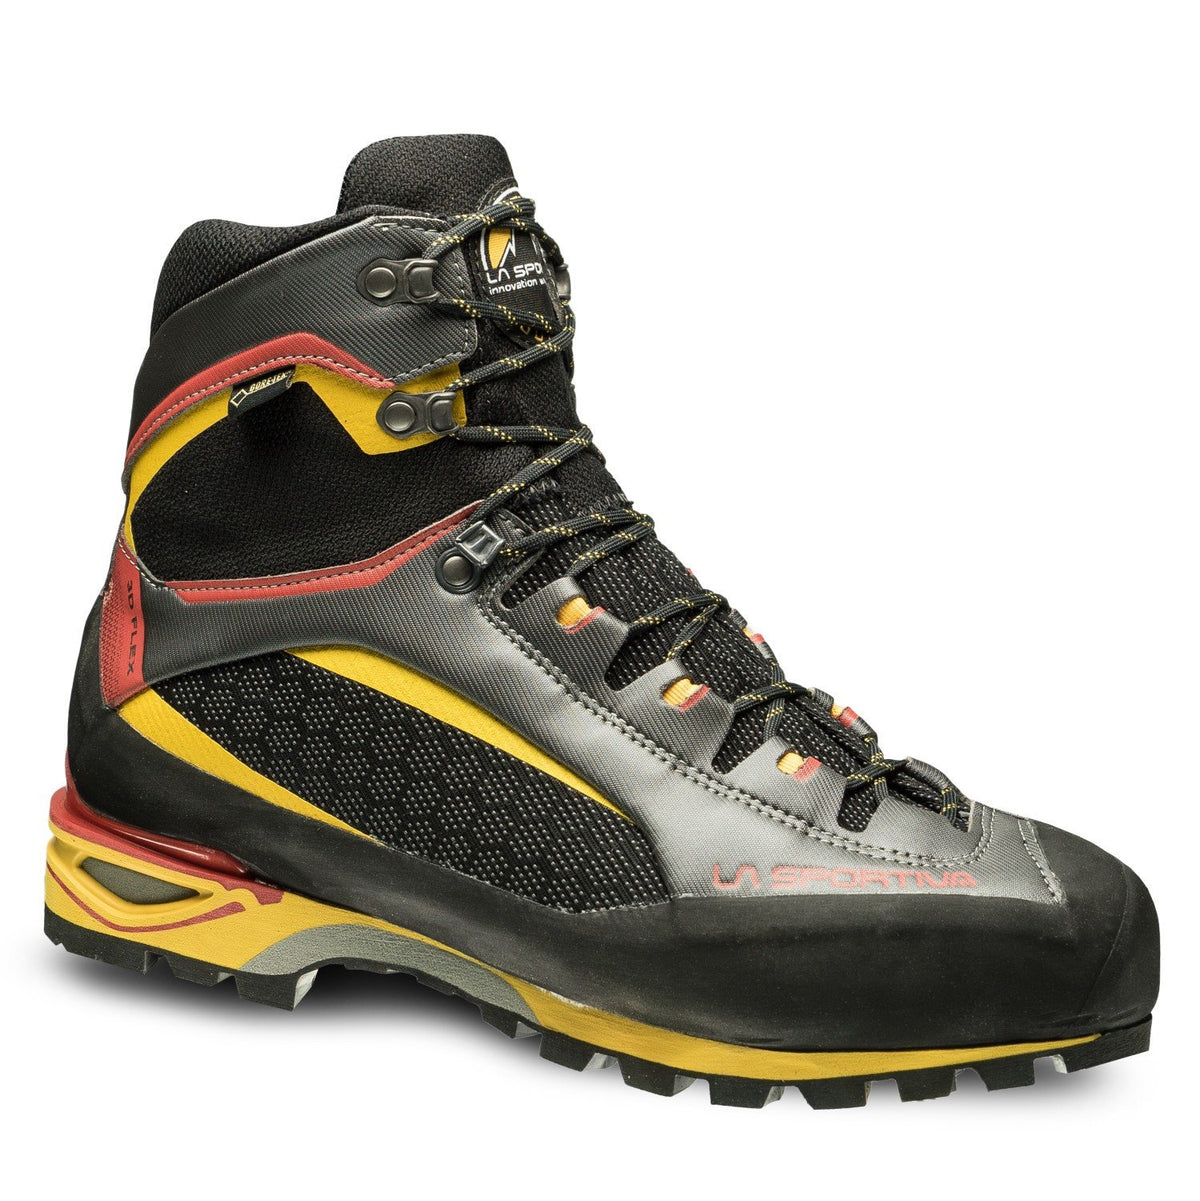 La Sportiva Trango Tower GTX Mountaineering Boot, in black, grey, red and yellow colours